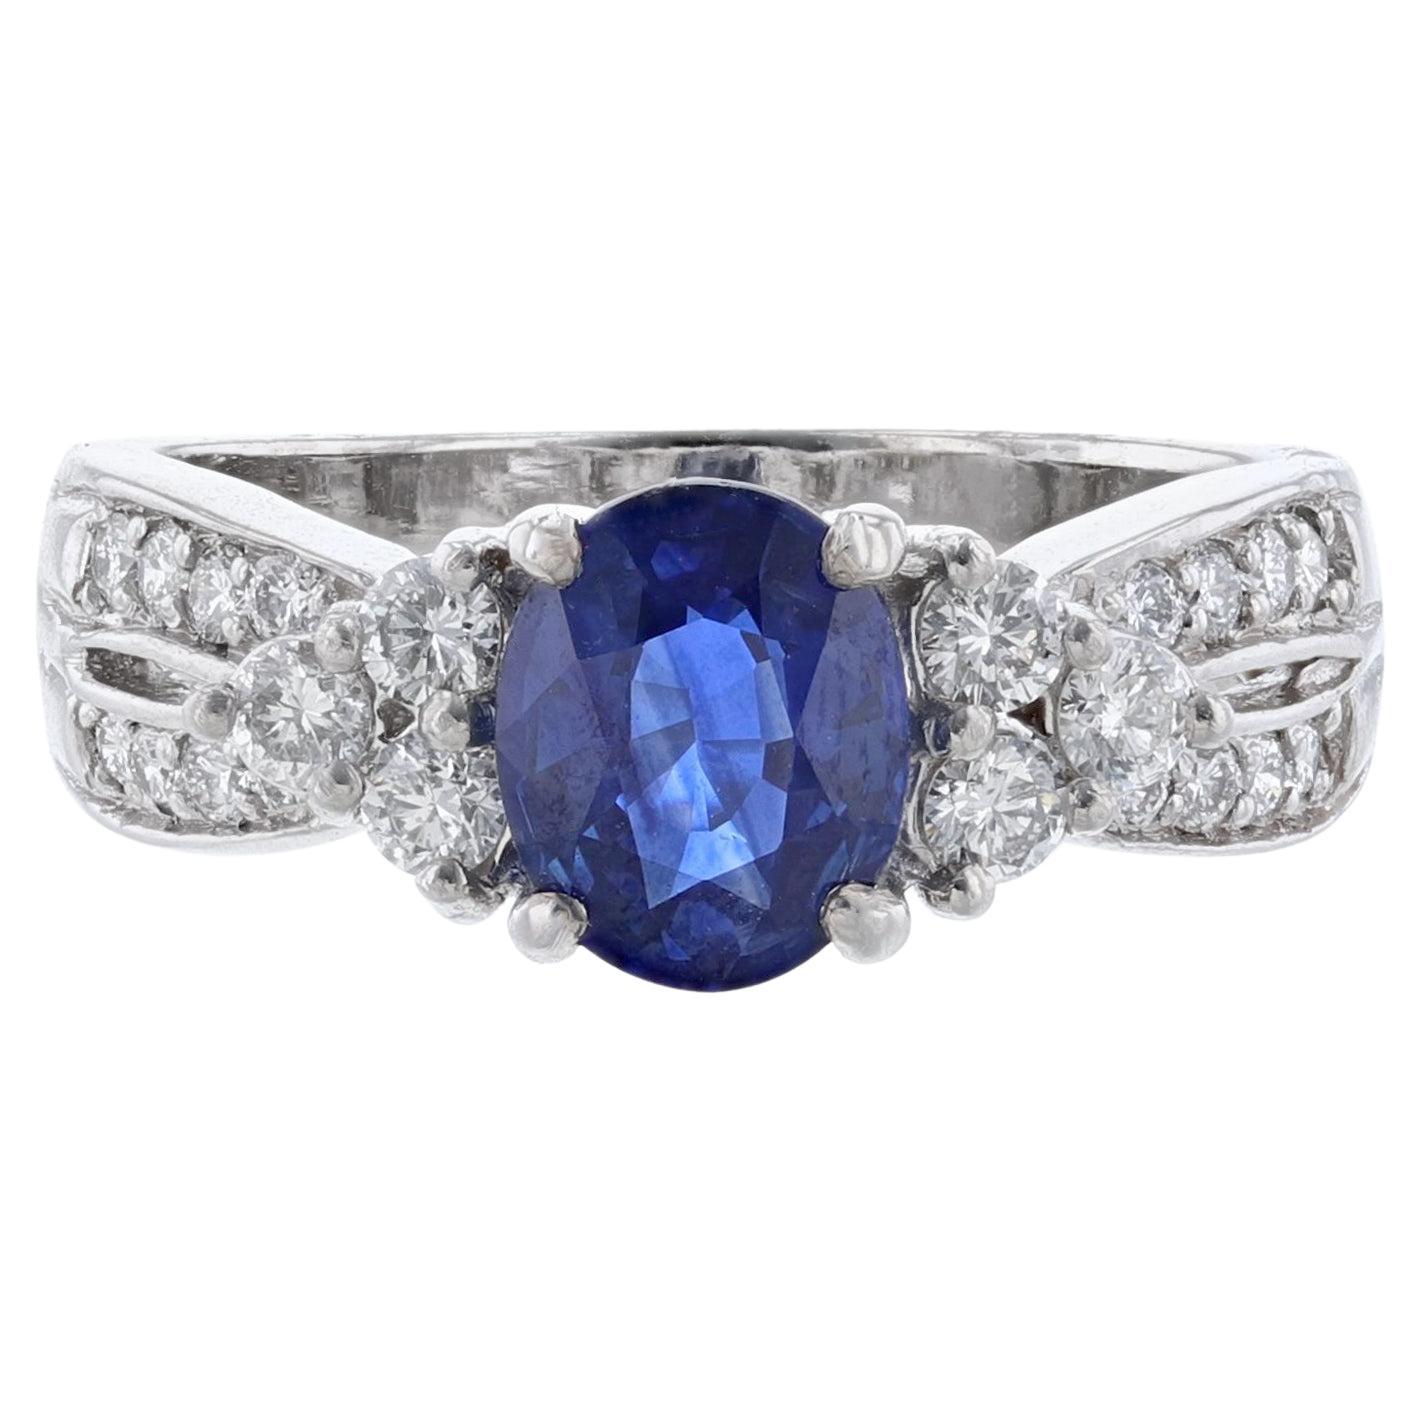 14K White Gold Oval Cut Blue Sapphire and Diamond Ring